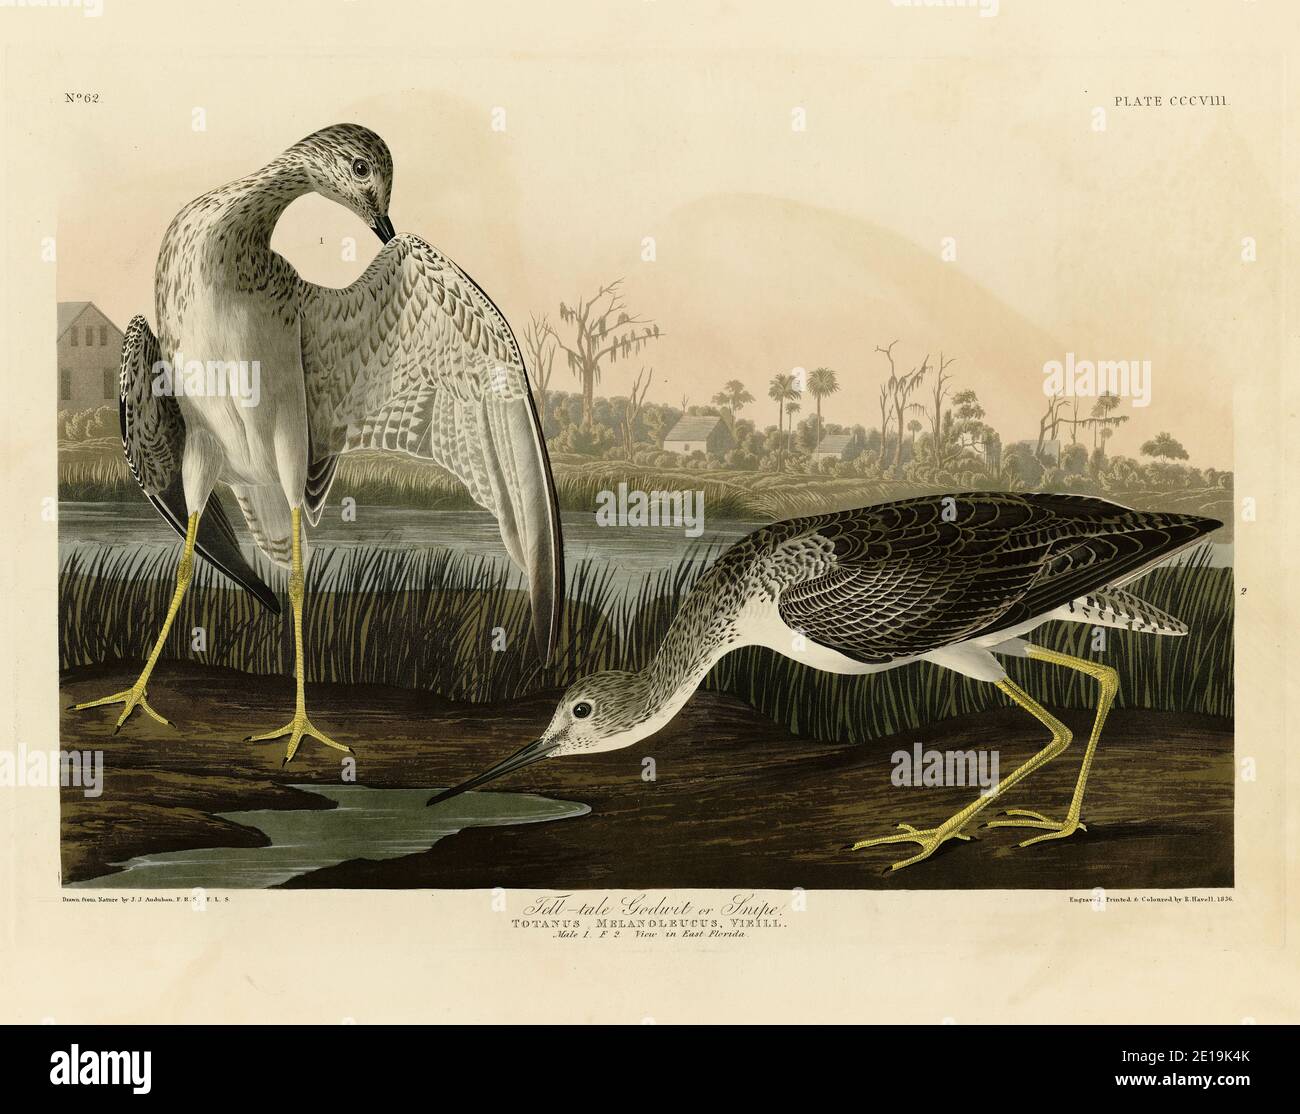 Plate 308 Tell-tale Godwit or Snipe (Greater Yellowlegs) The Birds of America folio (1827–1839) by John James Audubon, High resolution / quality image Stock Photo